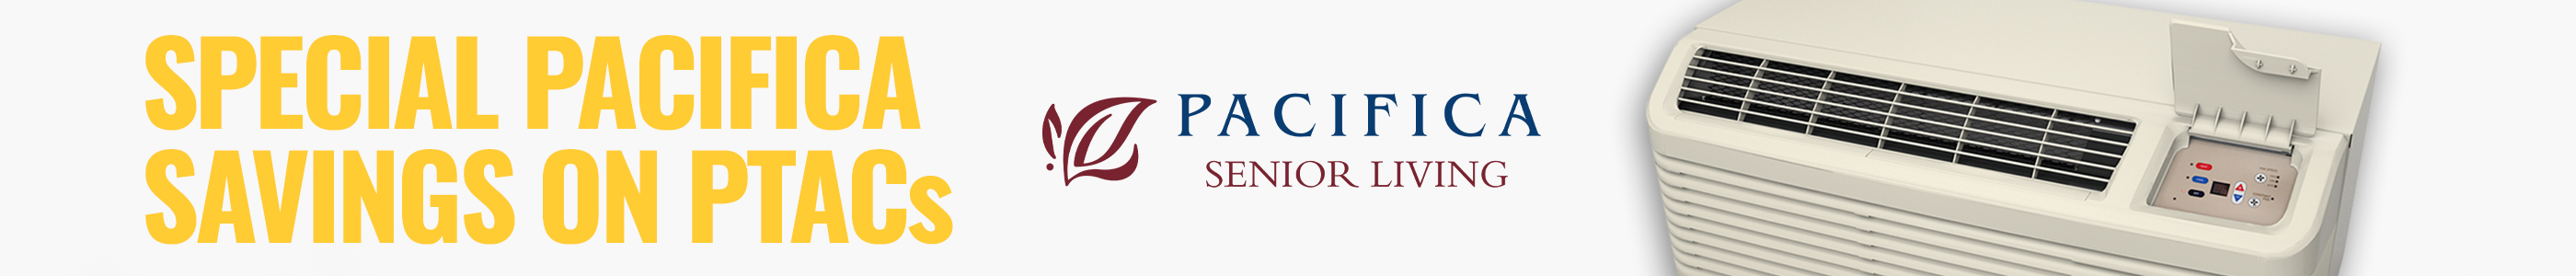 SPECIAL PACIFICA SAVINGS ON PTAC UNITS